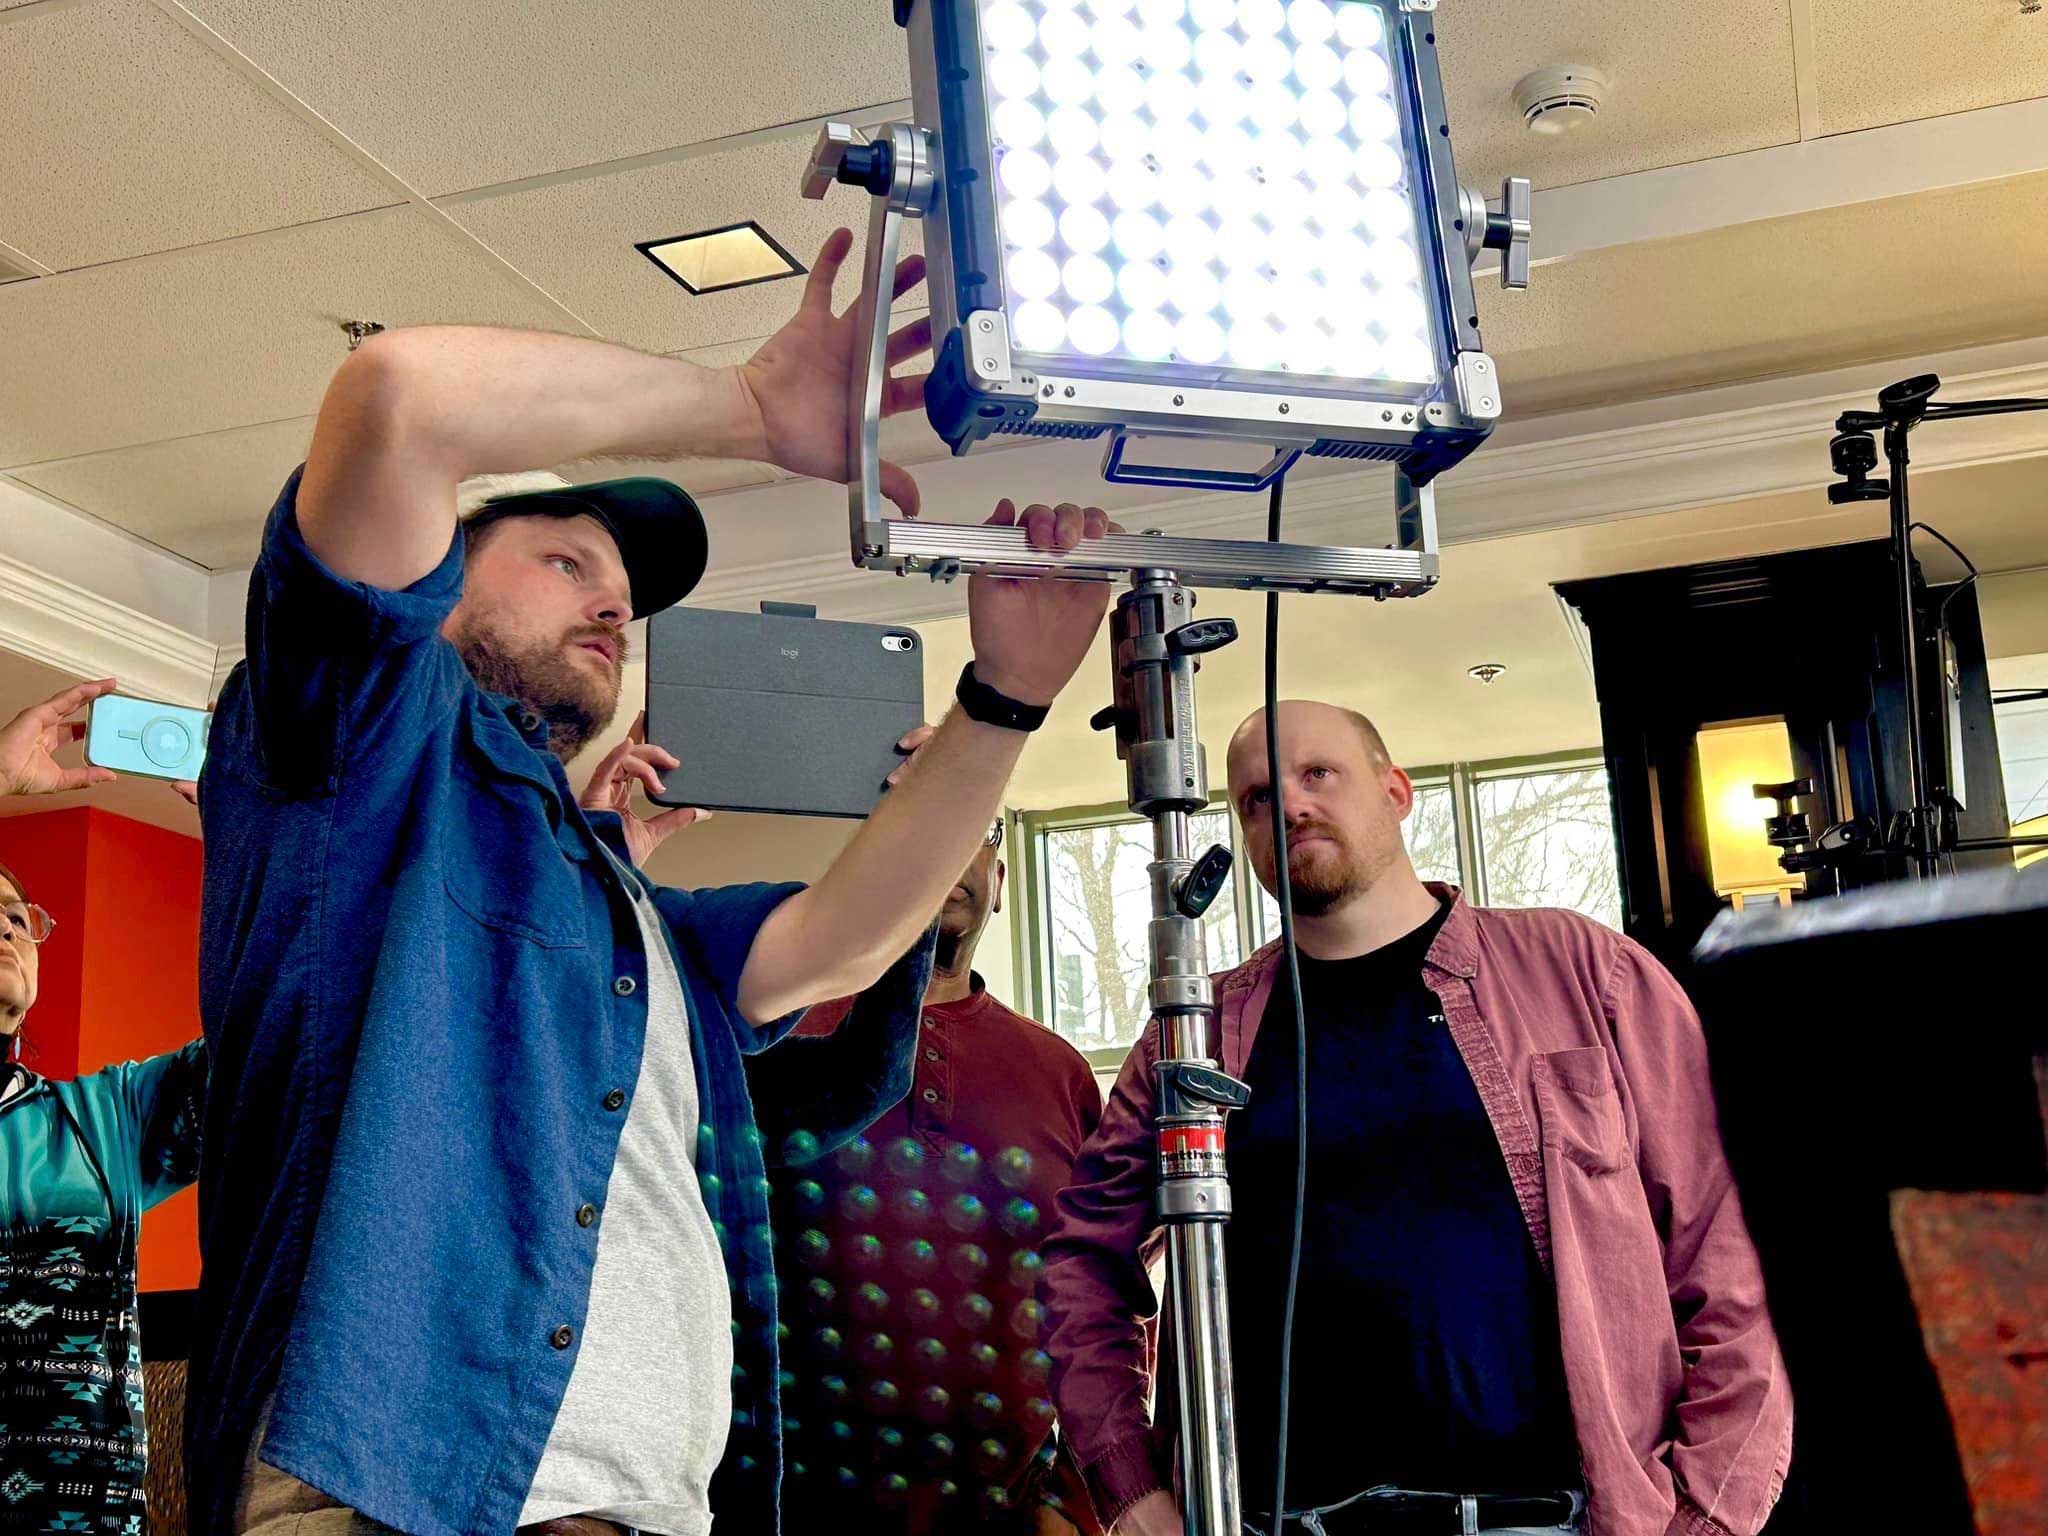 Professional lighting technician and instructor Jake Basnett demonstrates the proper usage of a light during “The Art of Cinematic Lighting” workshop.